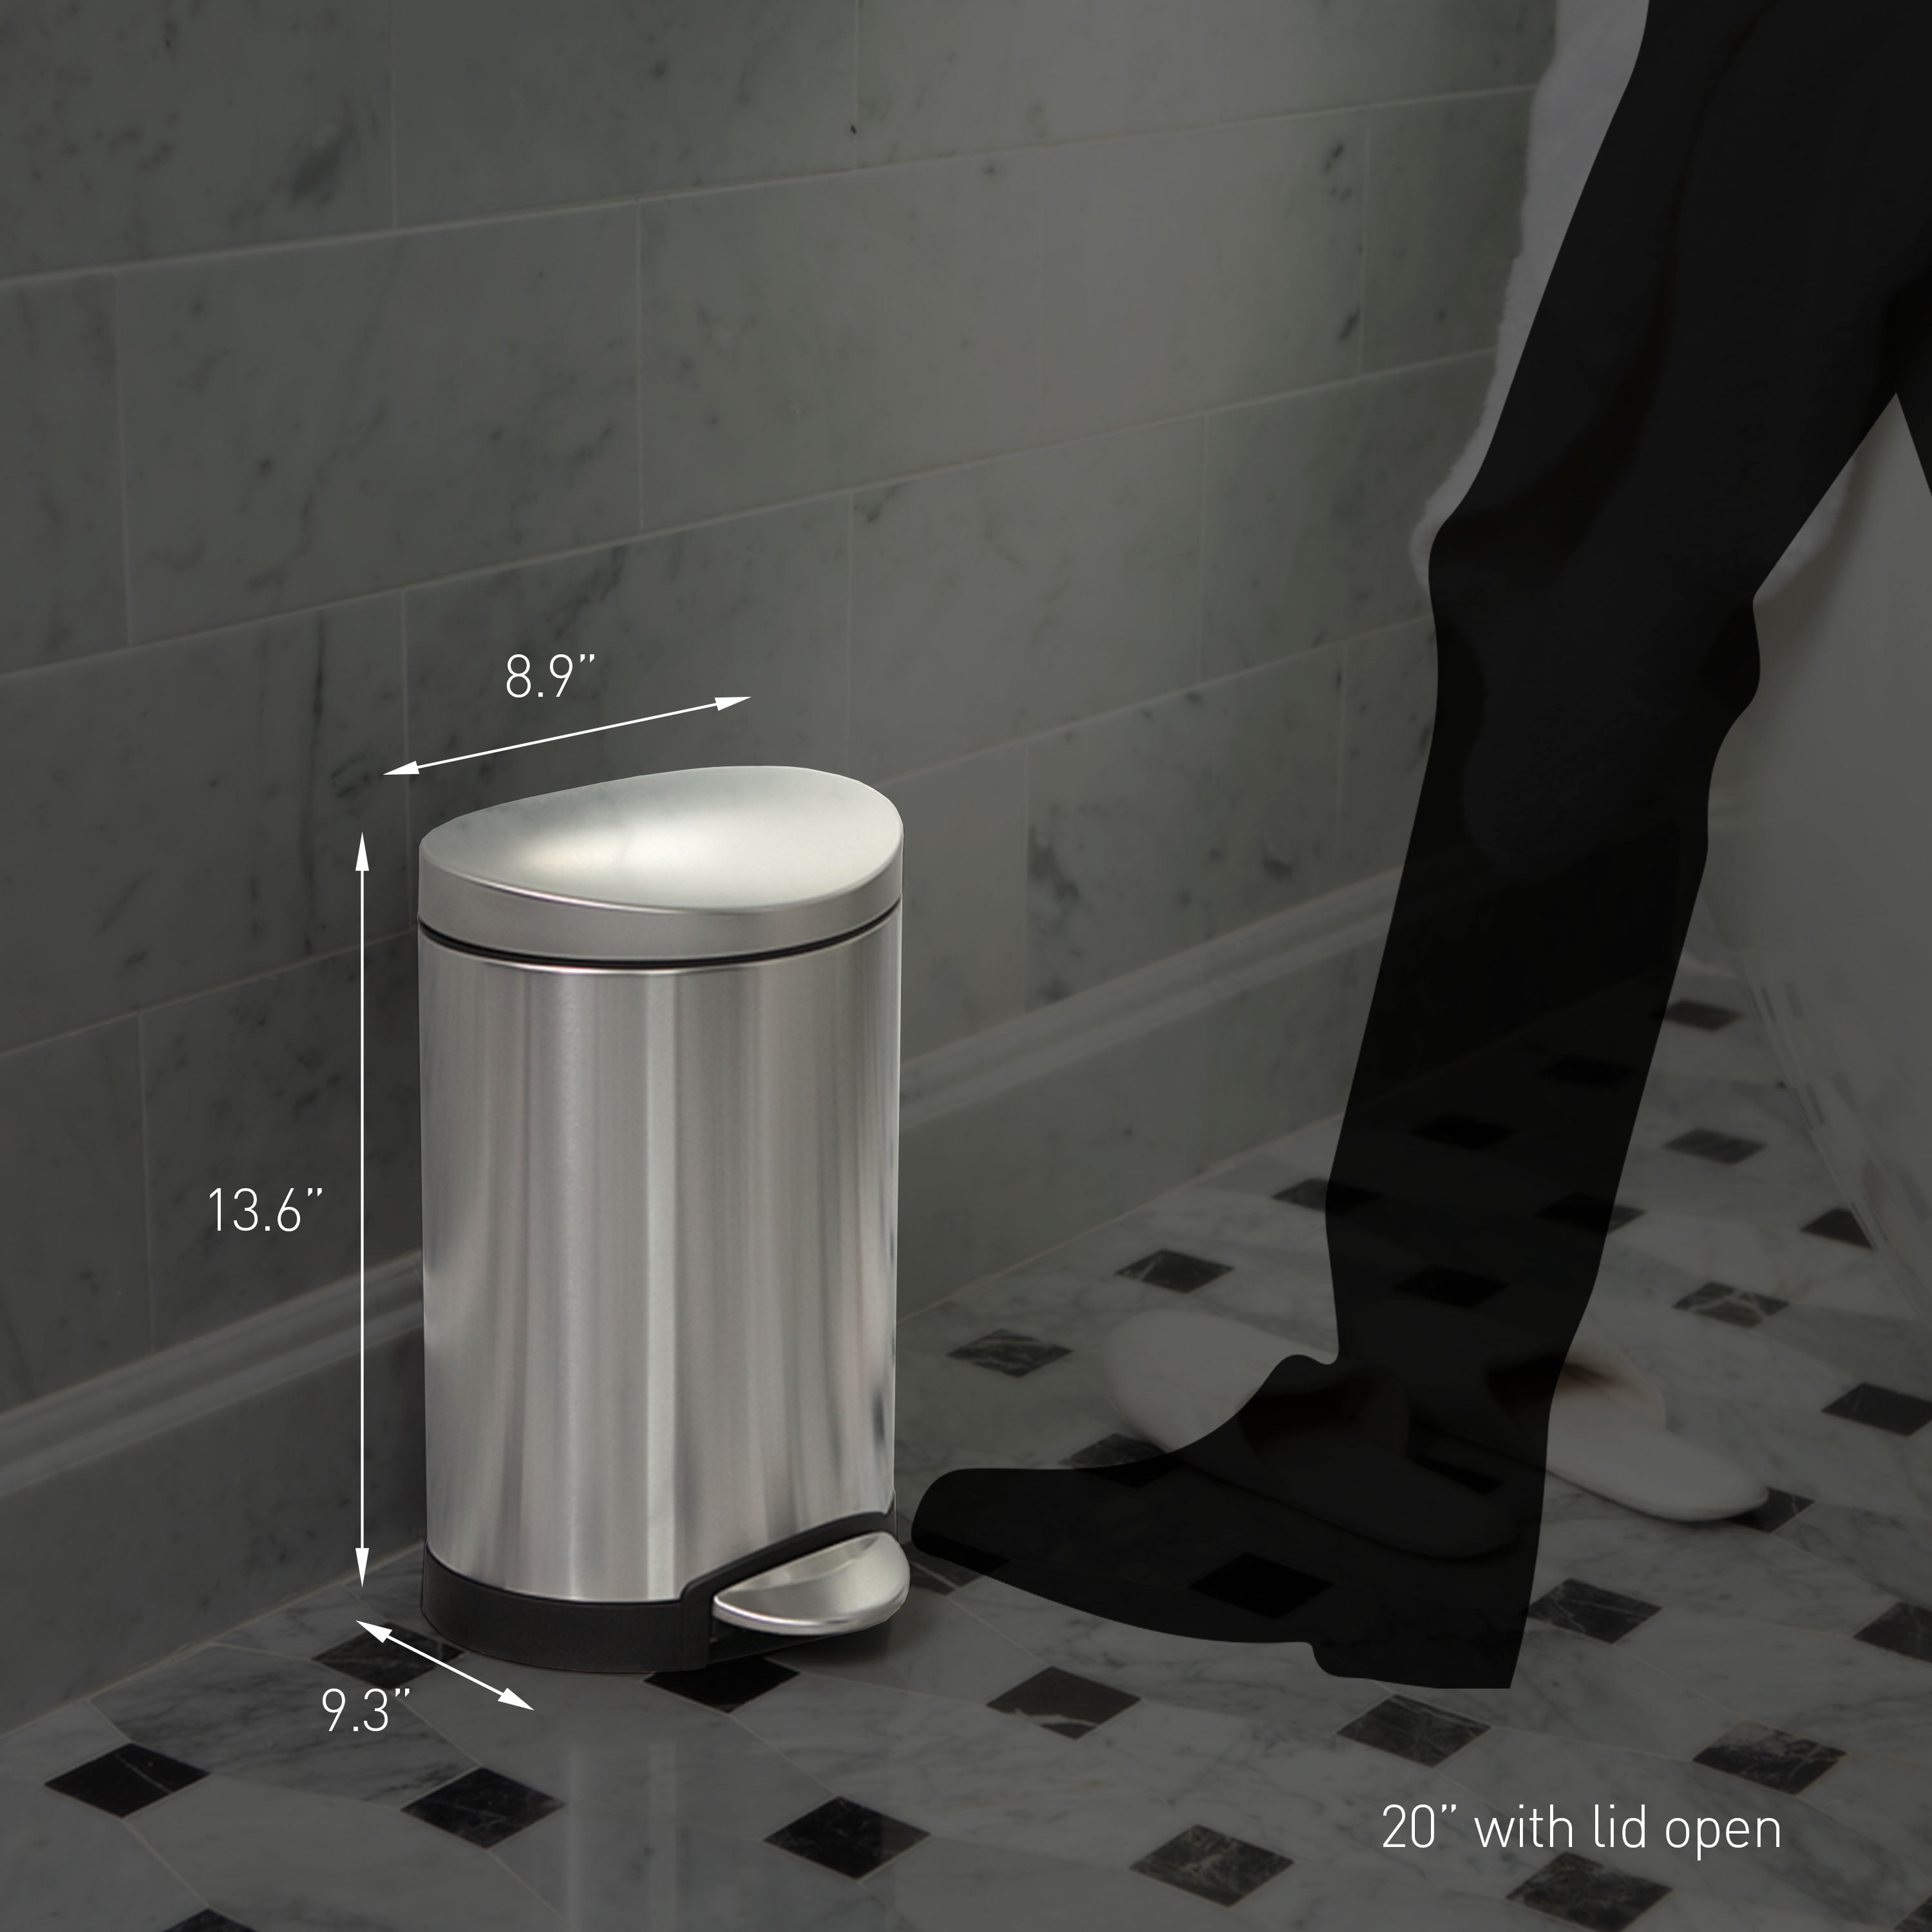 Simplehuman 6l Stainless Steel Semi-round Step Trash Can : Target